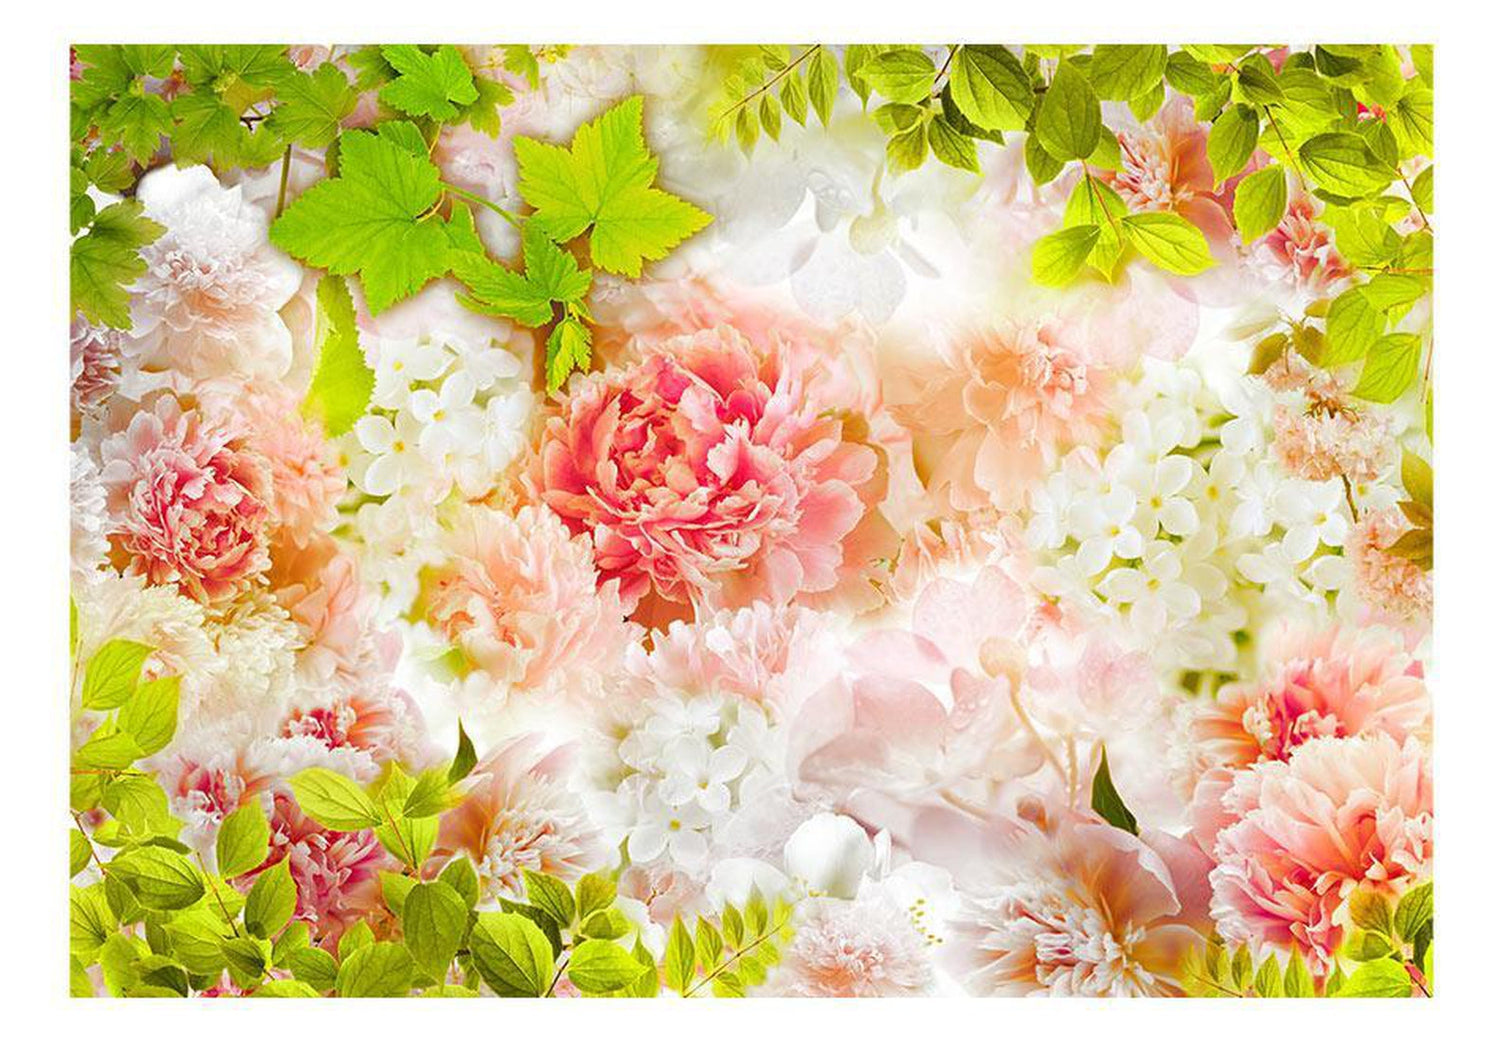 Peel and stick wall mural - Bright peonies-TipTopHomeDecor